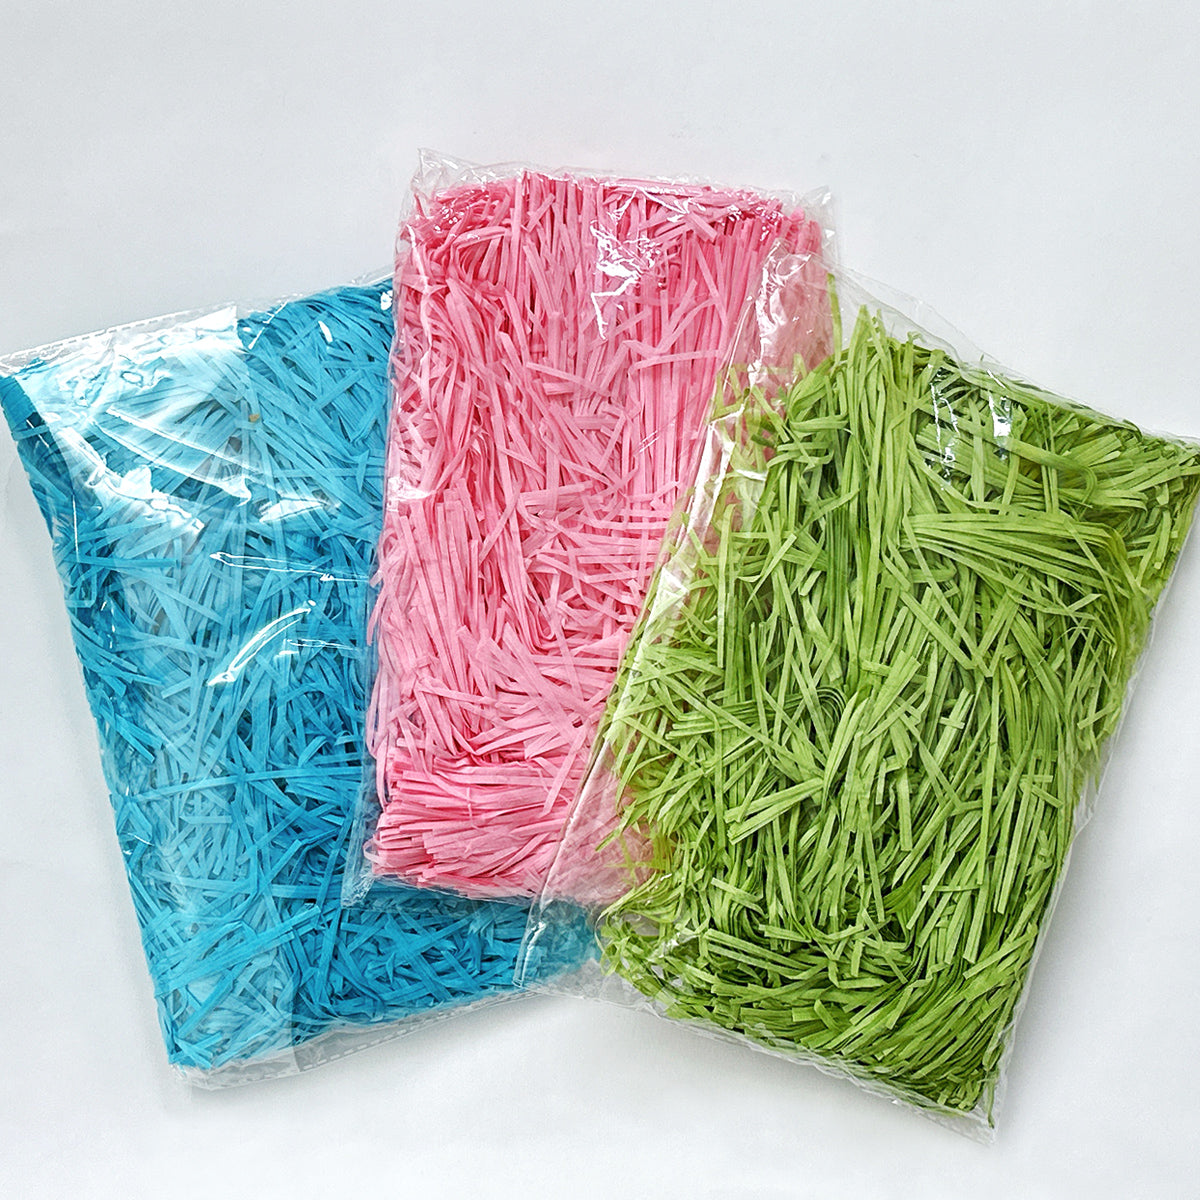 Wrapables Easter Grass Package Filler, Shredded Paper for Gift Wrappin